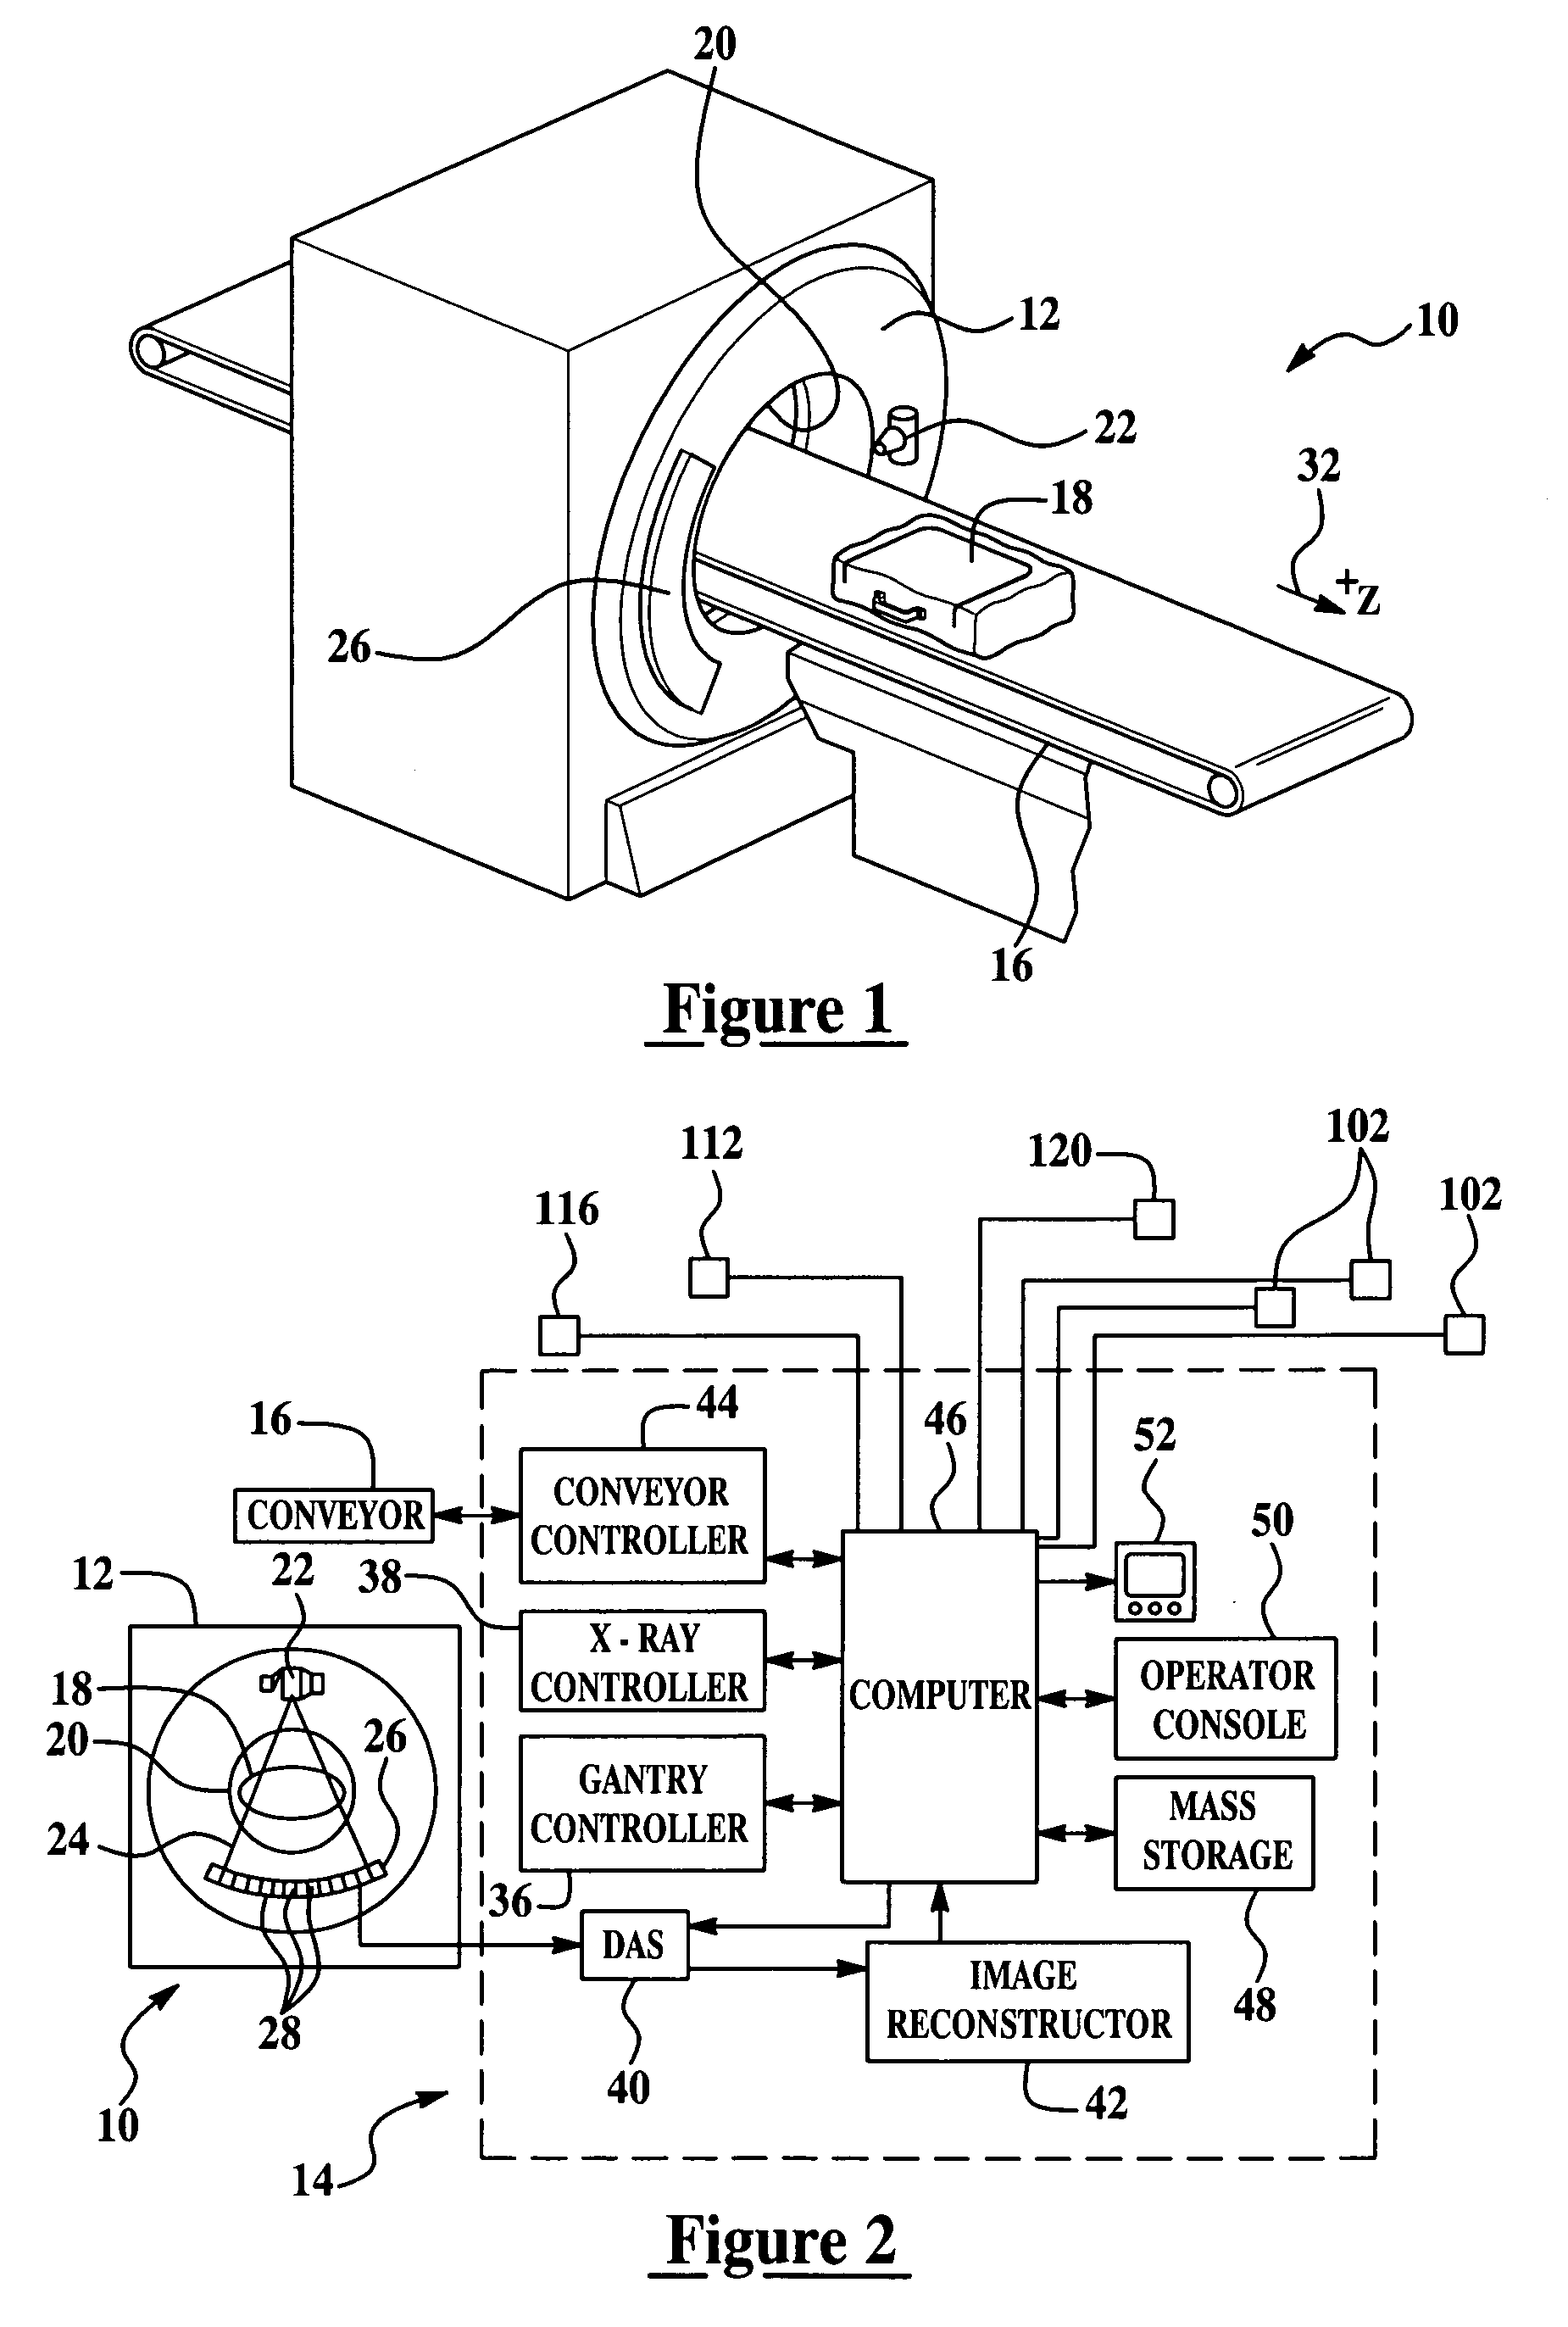 Apparatus and method for providing a shielding means for an x-ray detection system